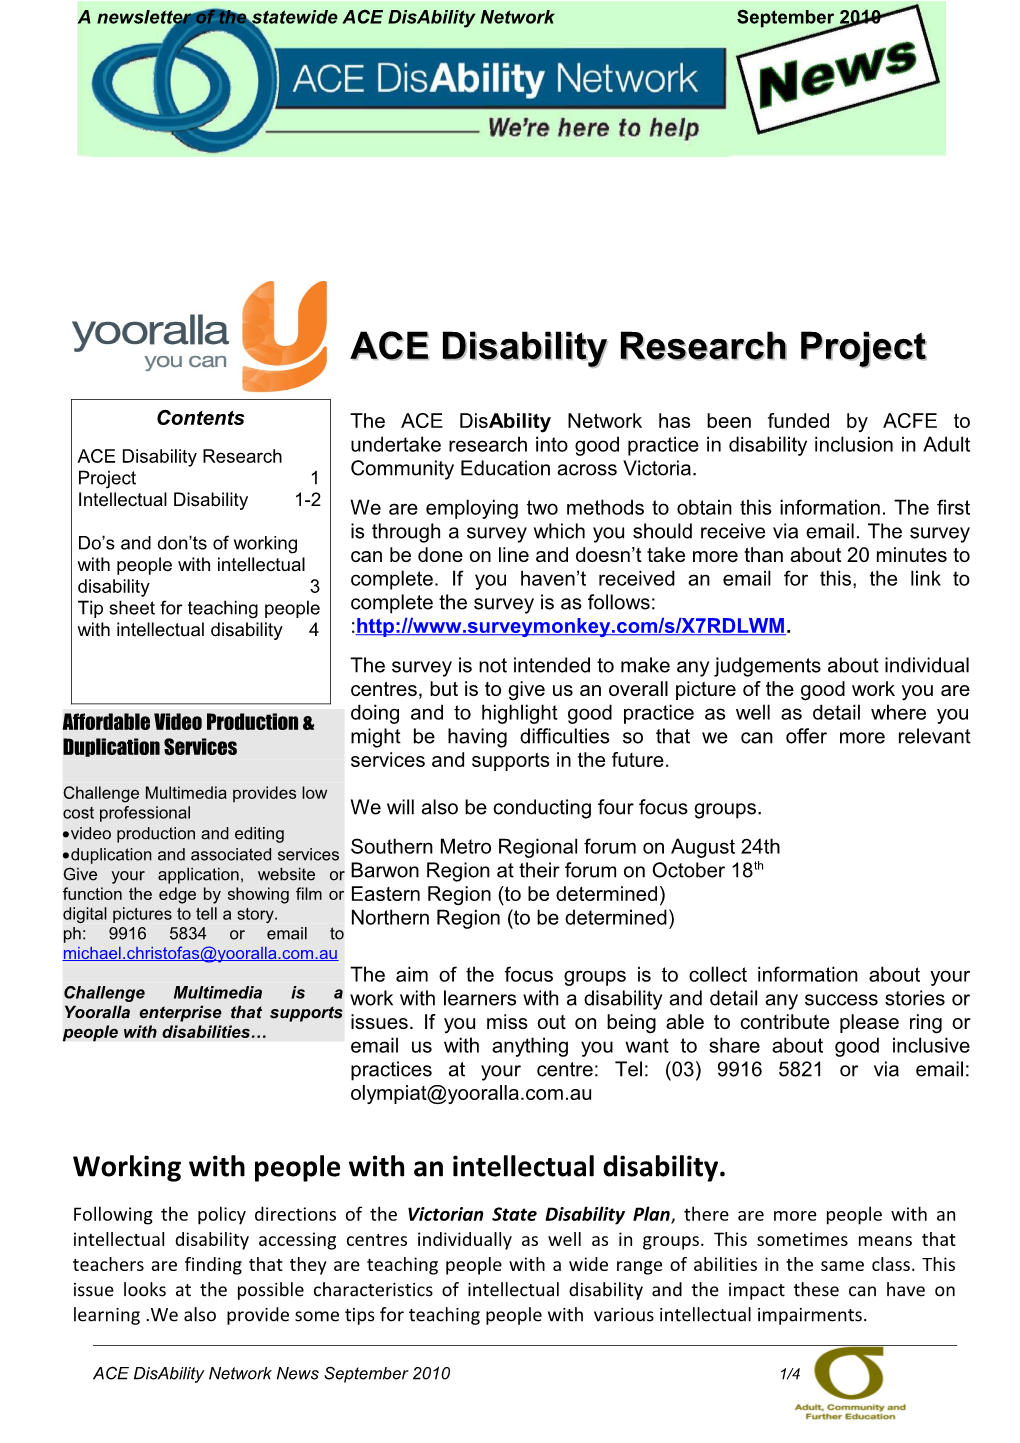 Working with People with an Intellectual Disability